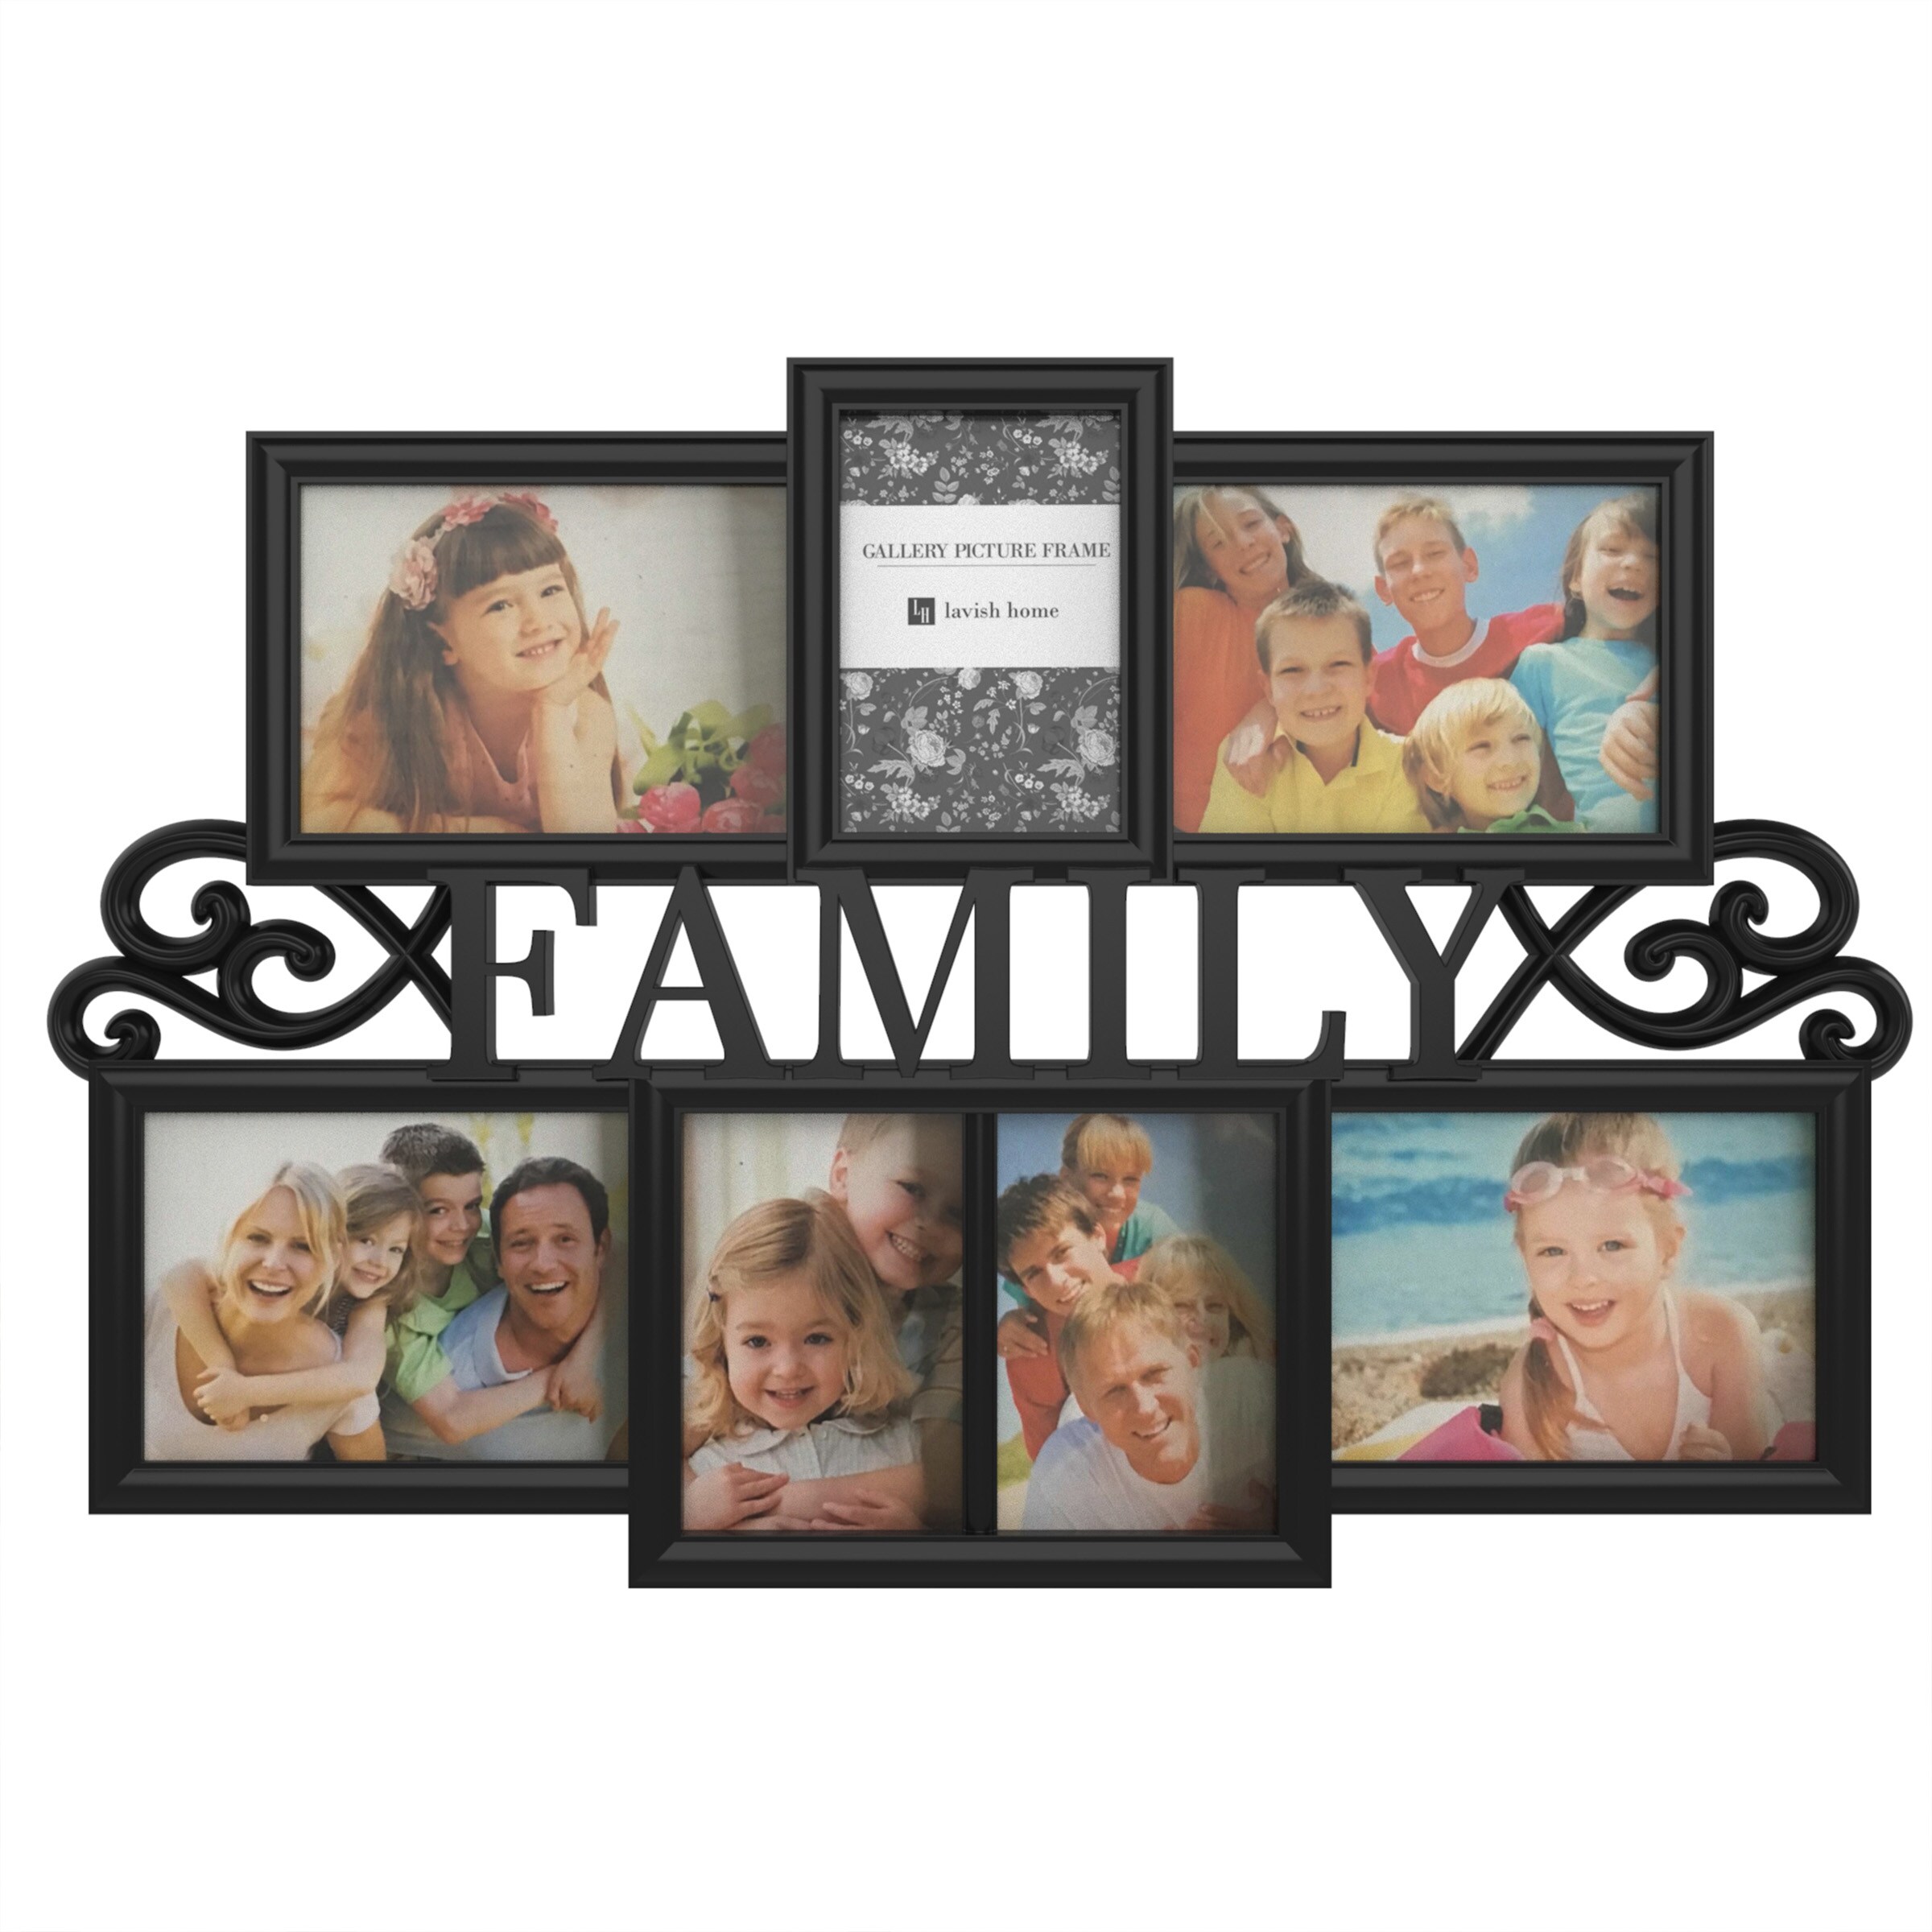 Malden 8-Opening Wood Puzzle Collage Picture Frame, White, 4 x 6